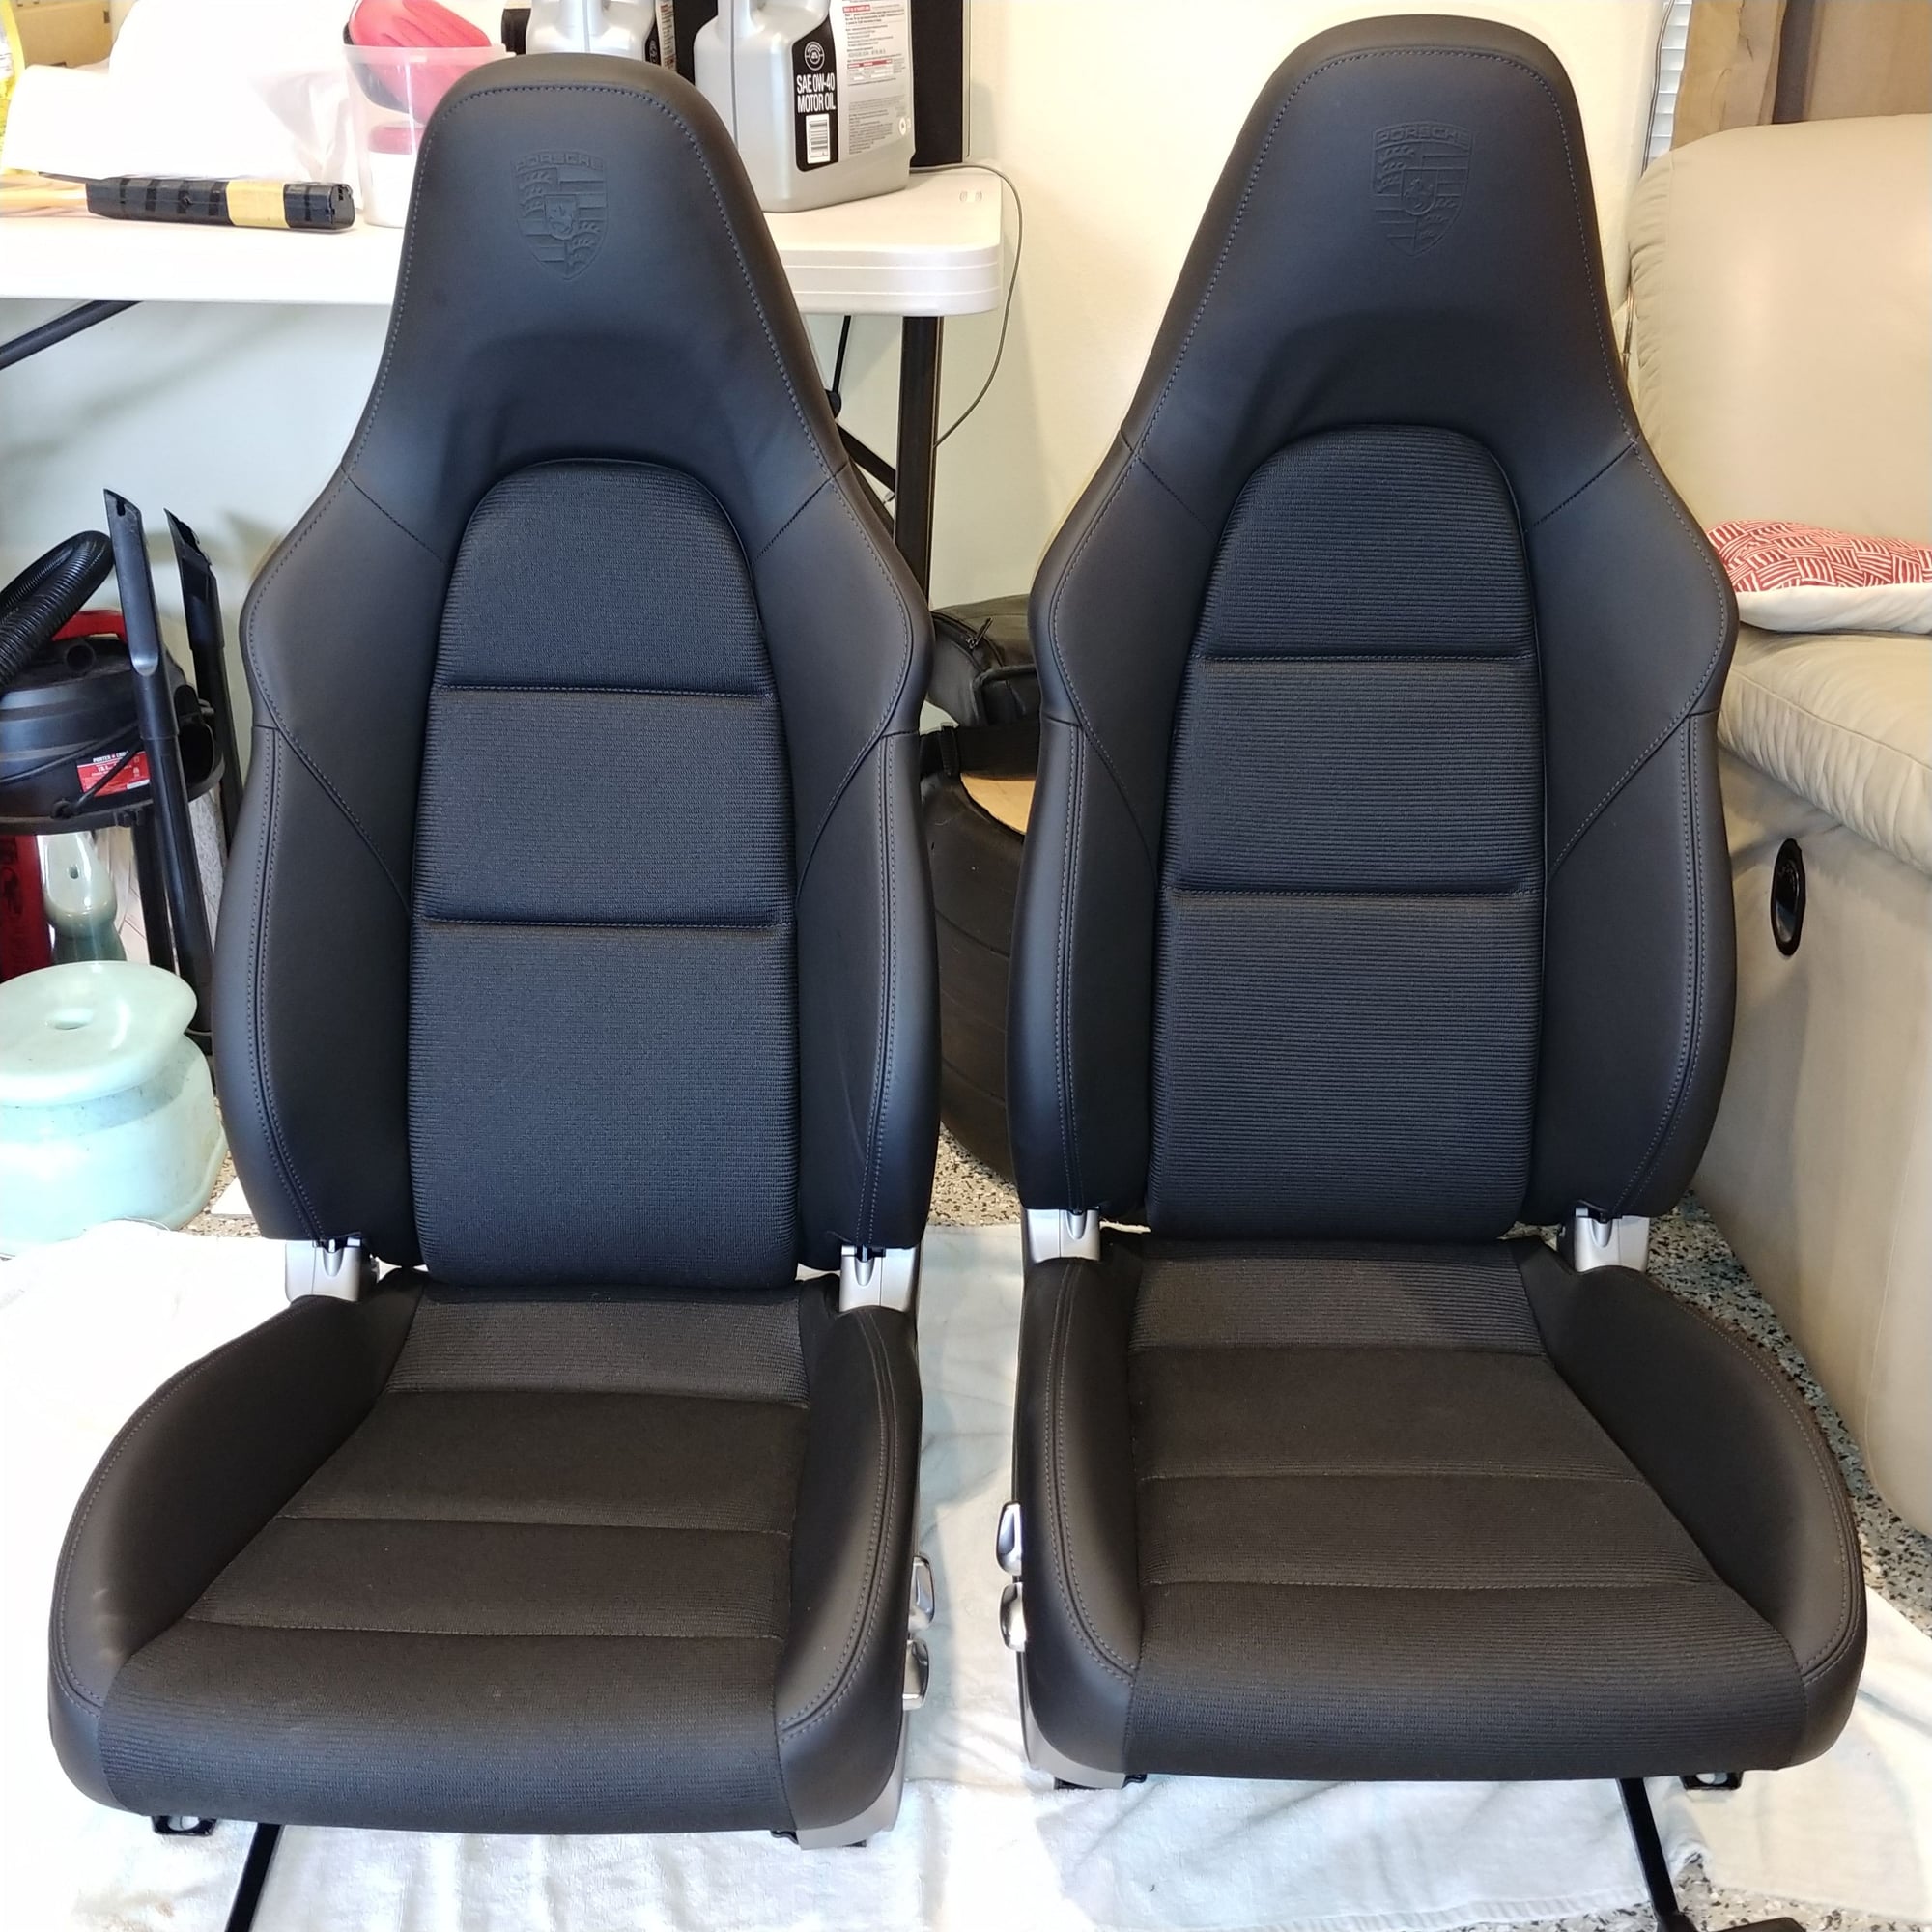 Interior/Upholstery - 4 Way Seats off of 2019 GT3 Touring - Porsche crest in headrest.  As New. - Used - 2012 to 2019 Porsche 911 - Rowland Heights, CA 91748, United States